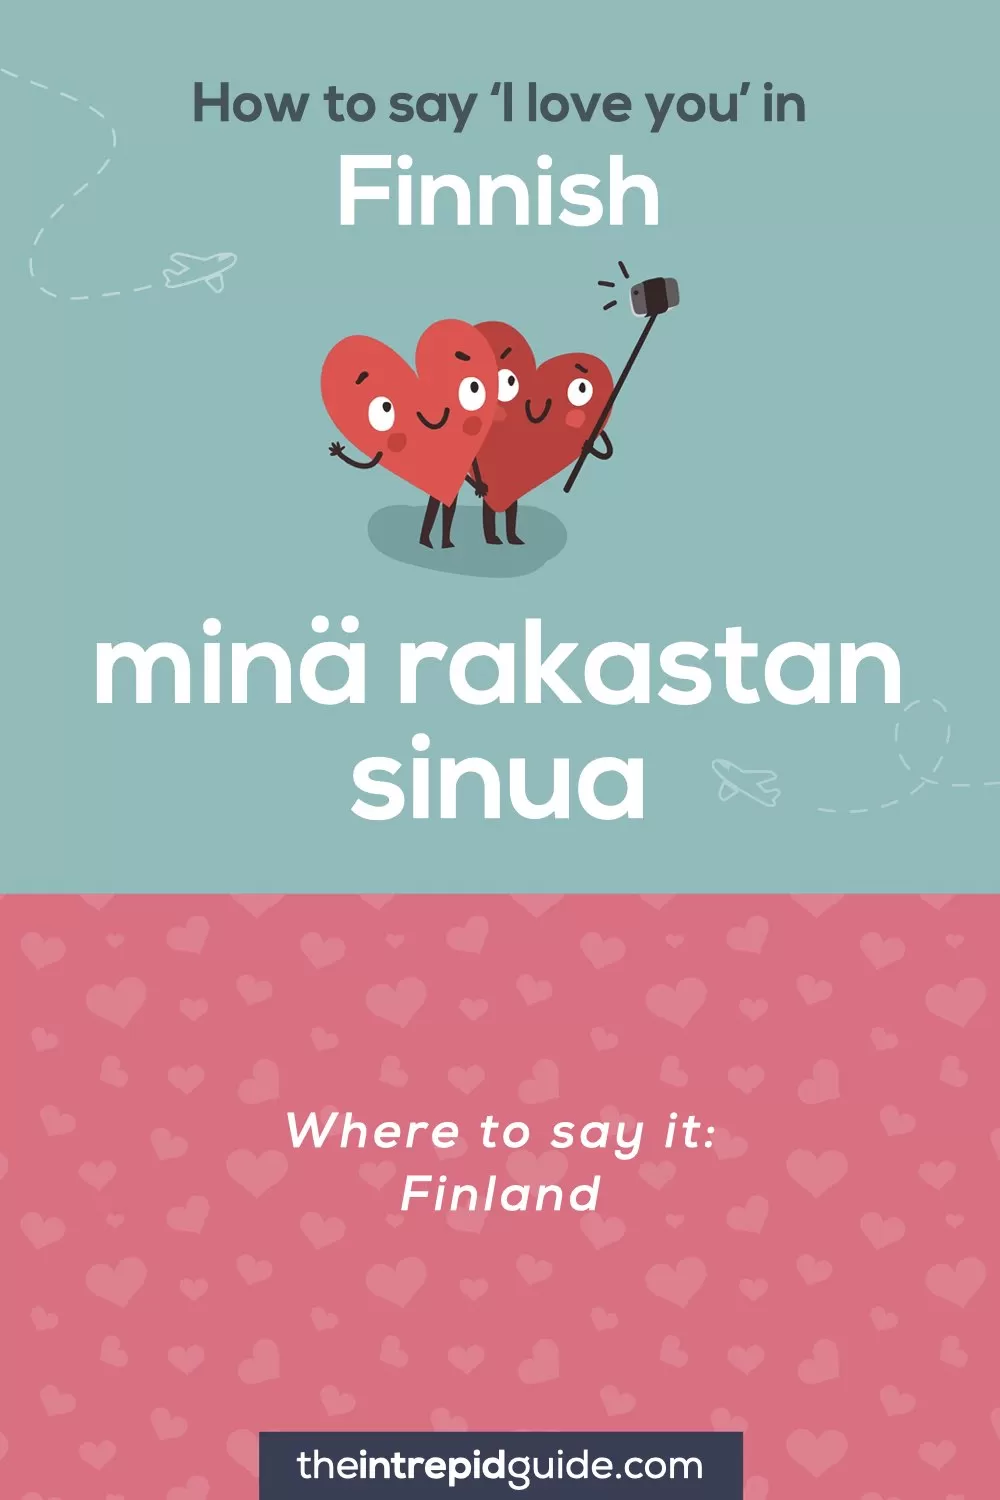 How to say I love you in different languages - Finnish - mina rakastan sinua